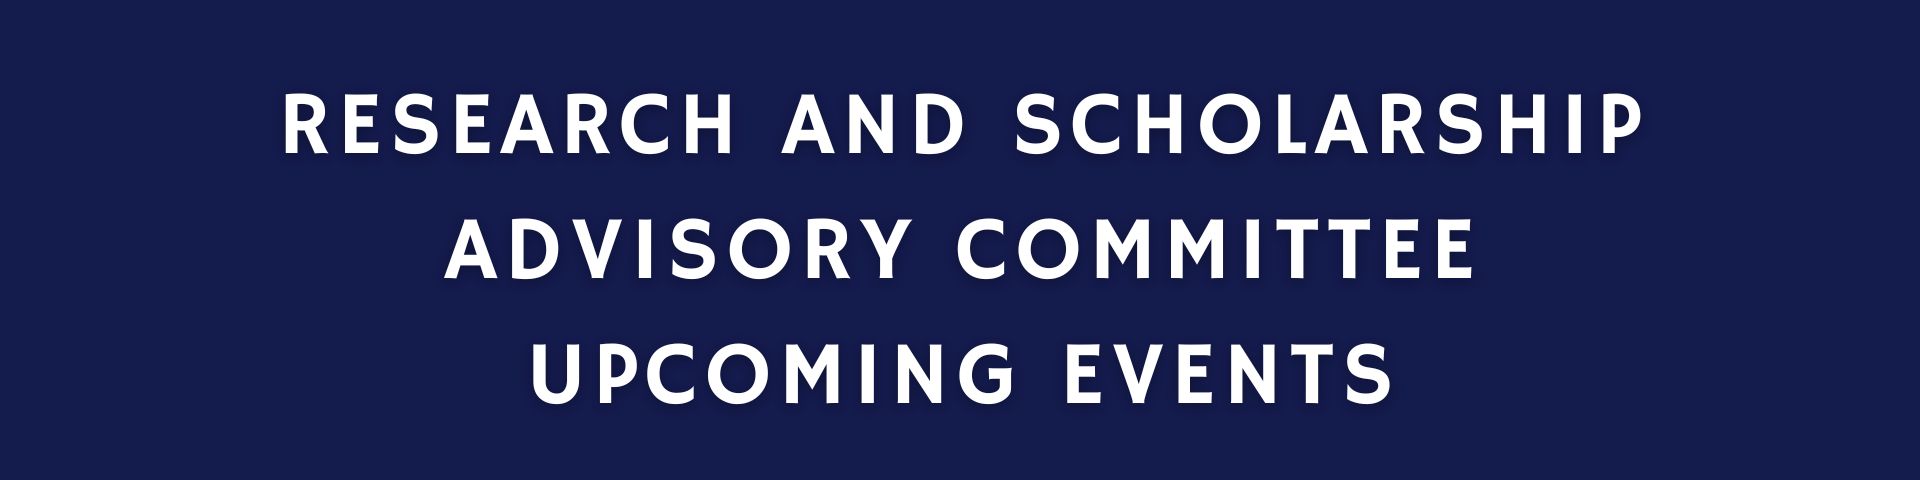 Research and Scholarship Advisory Committee Upcoming Events